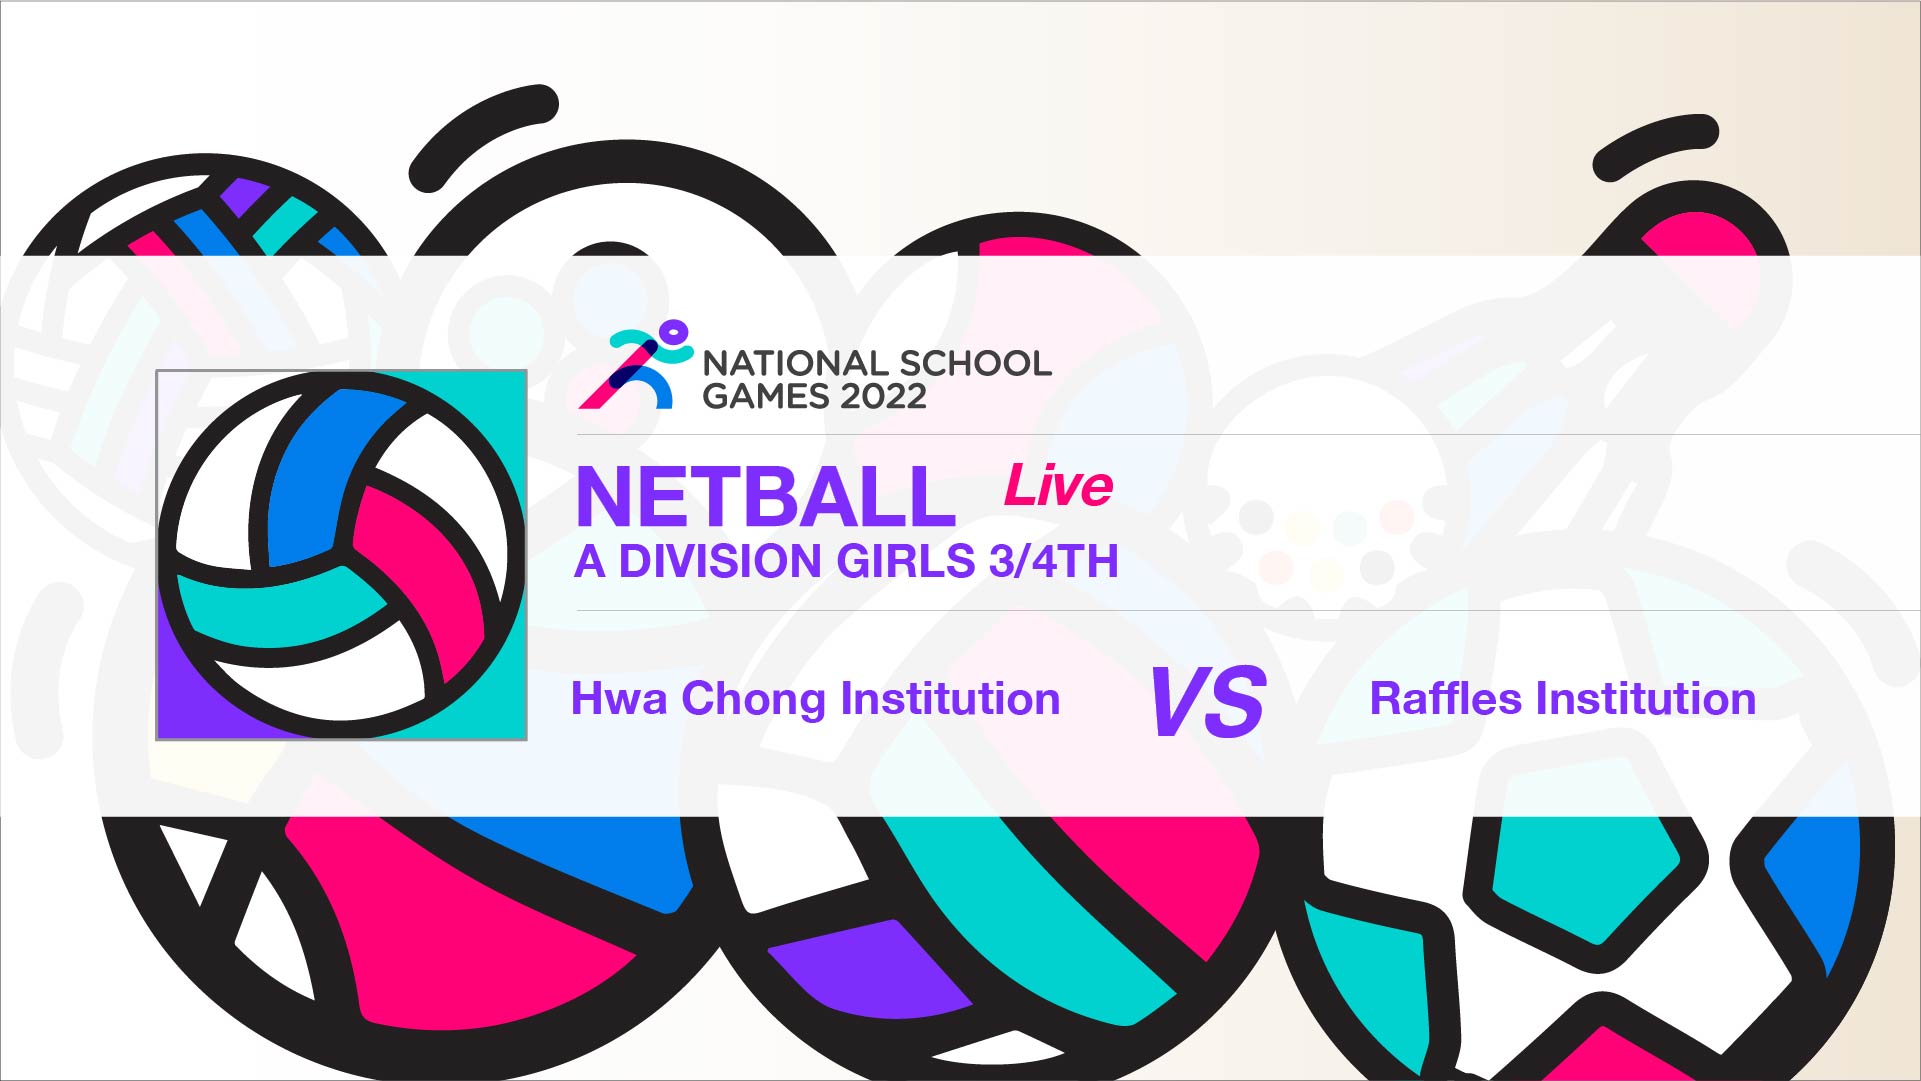 SSSC Netball A Division Girls 3rd/4th | Hwa Chong Institution vs Raffles Institution